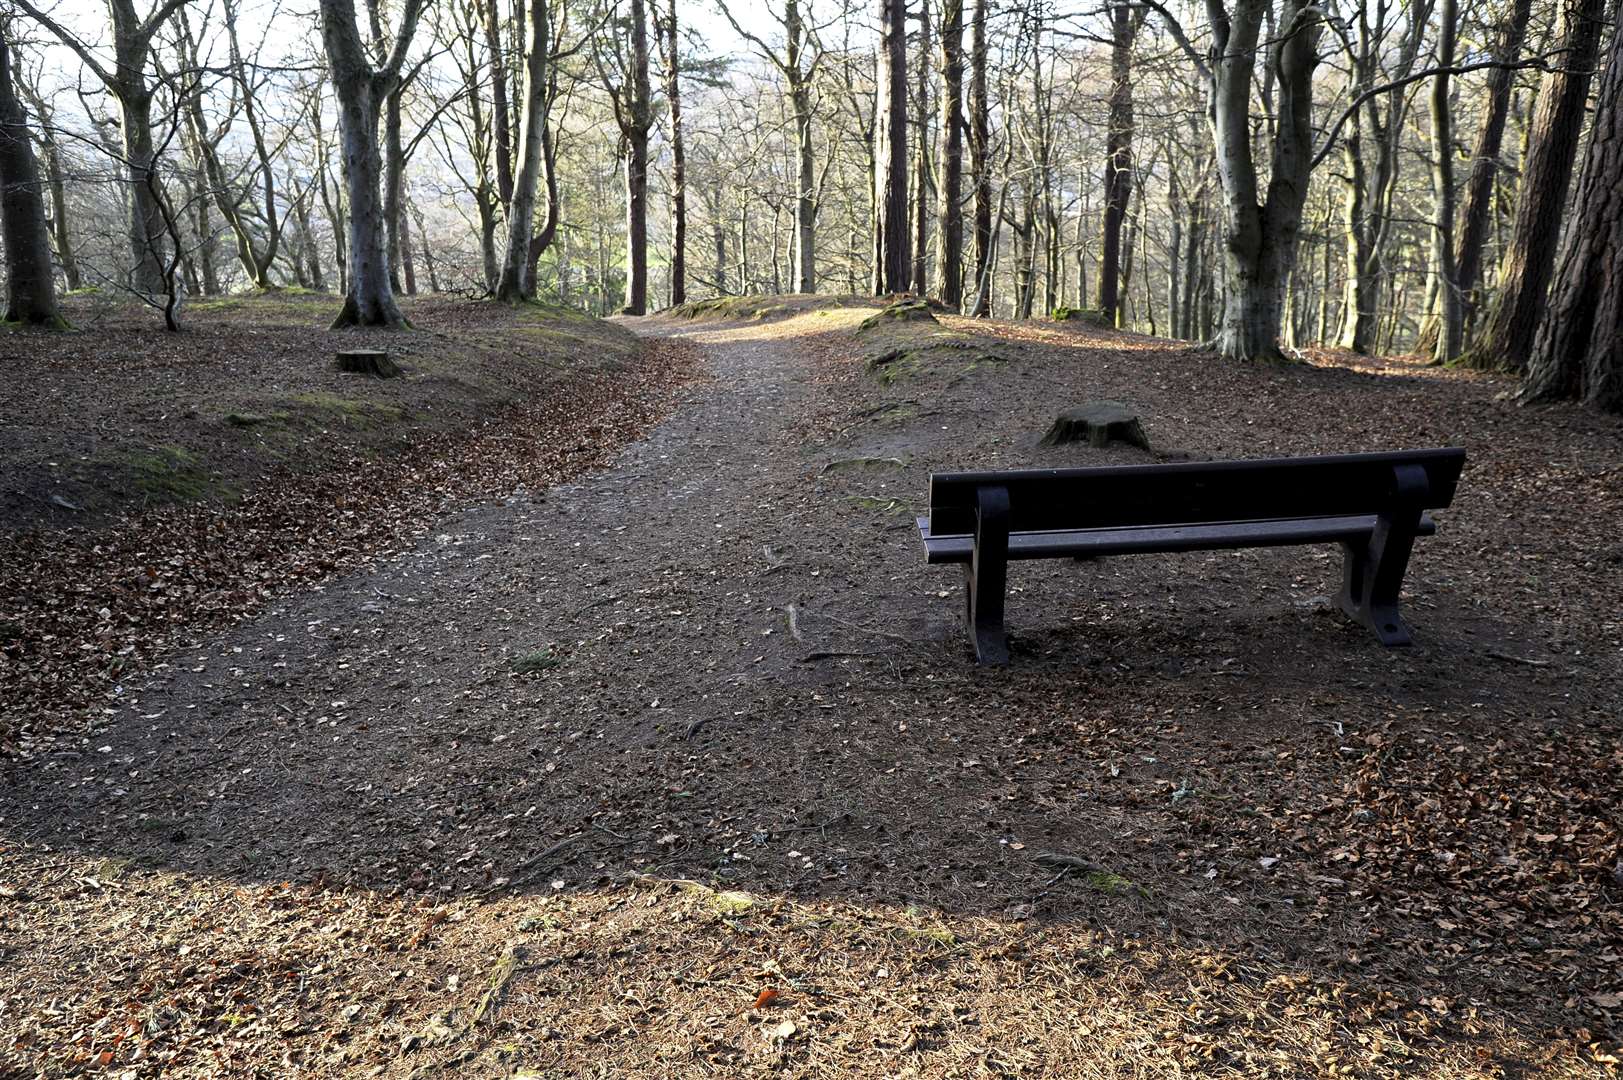 Forres Features have already installed five benches at Cluny Hill with 'Colours' profits.